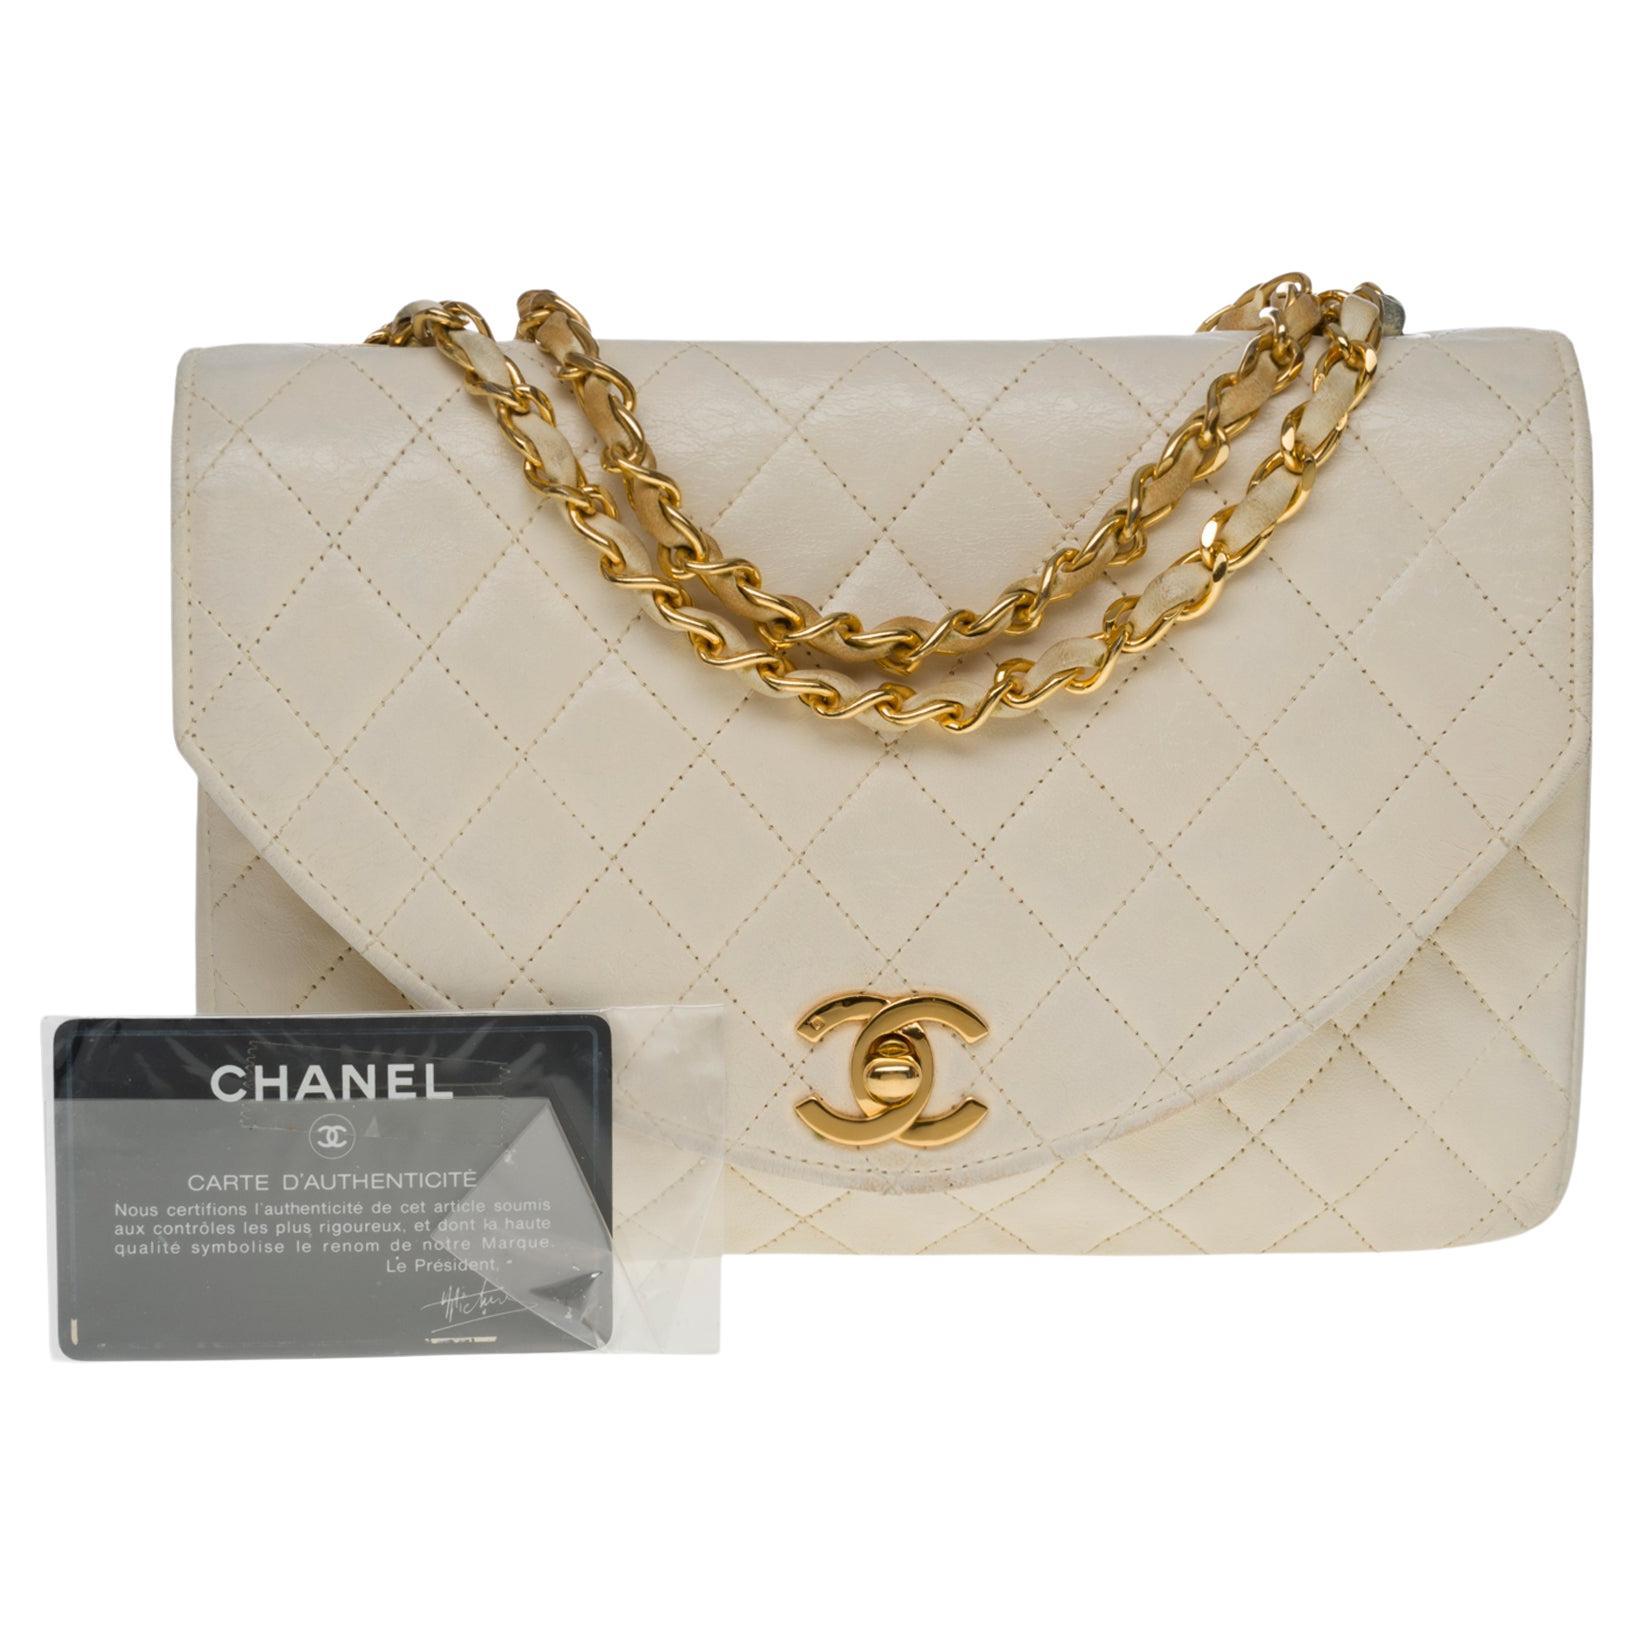 Amazing Chanel Classic single shoulder Flap bag in ecru quilted